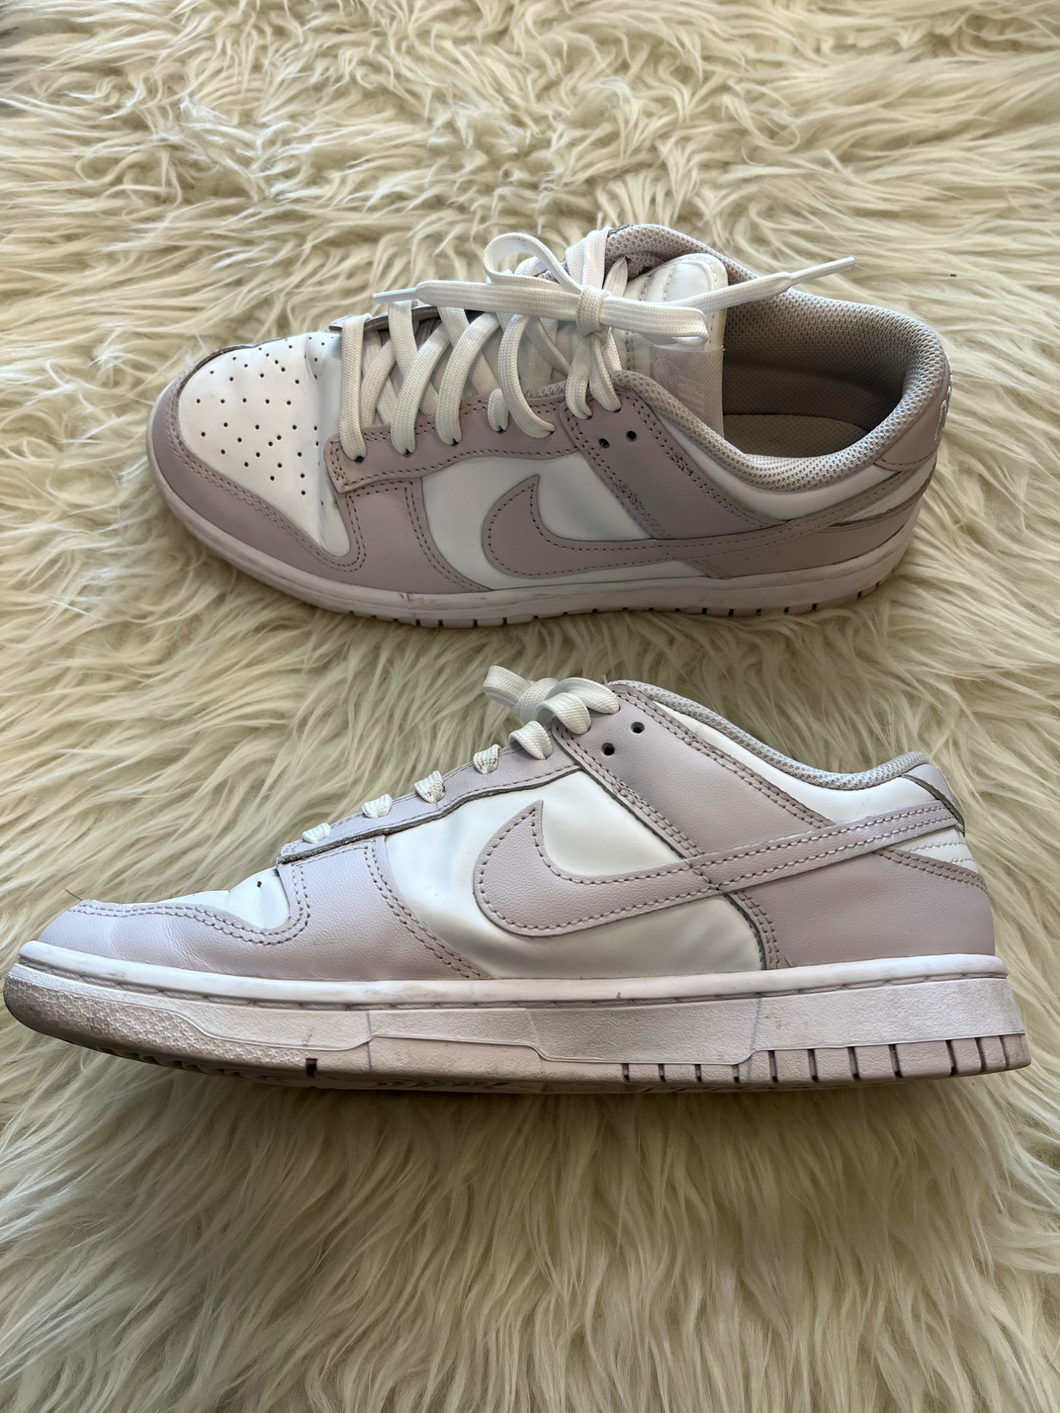 Nike Athletic Shoes Womens 8.5